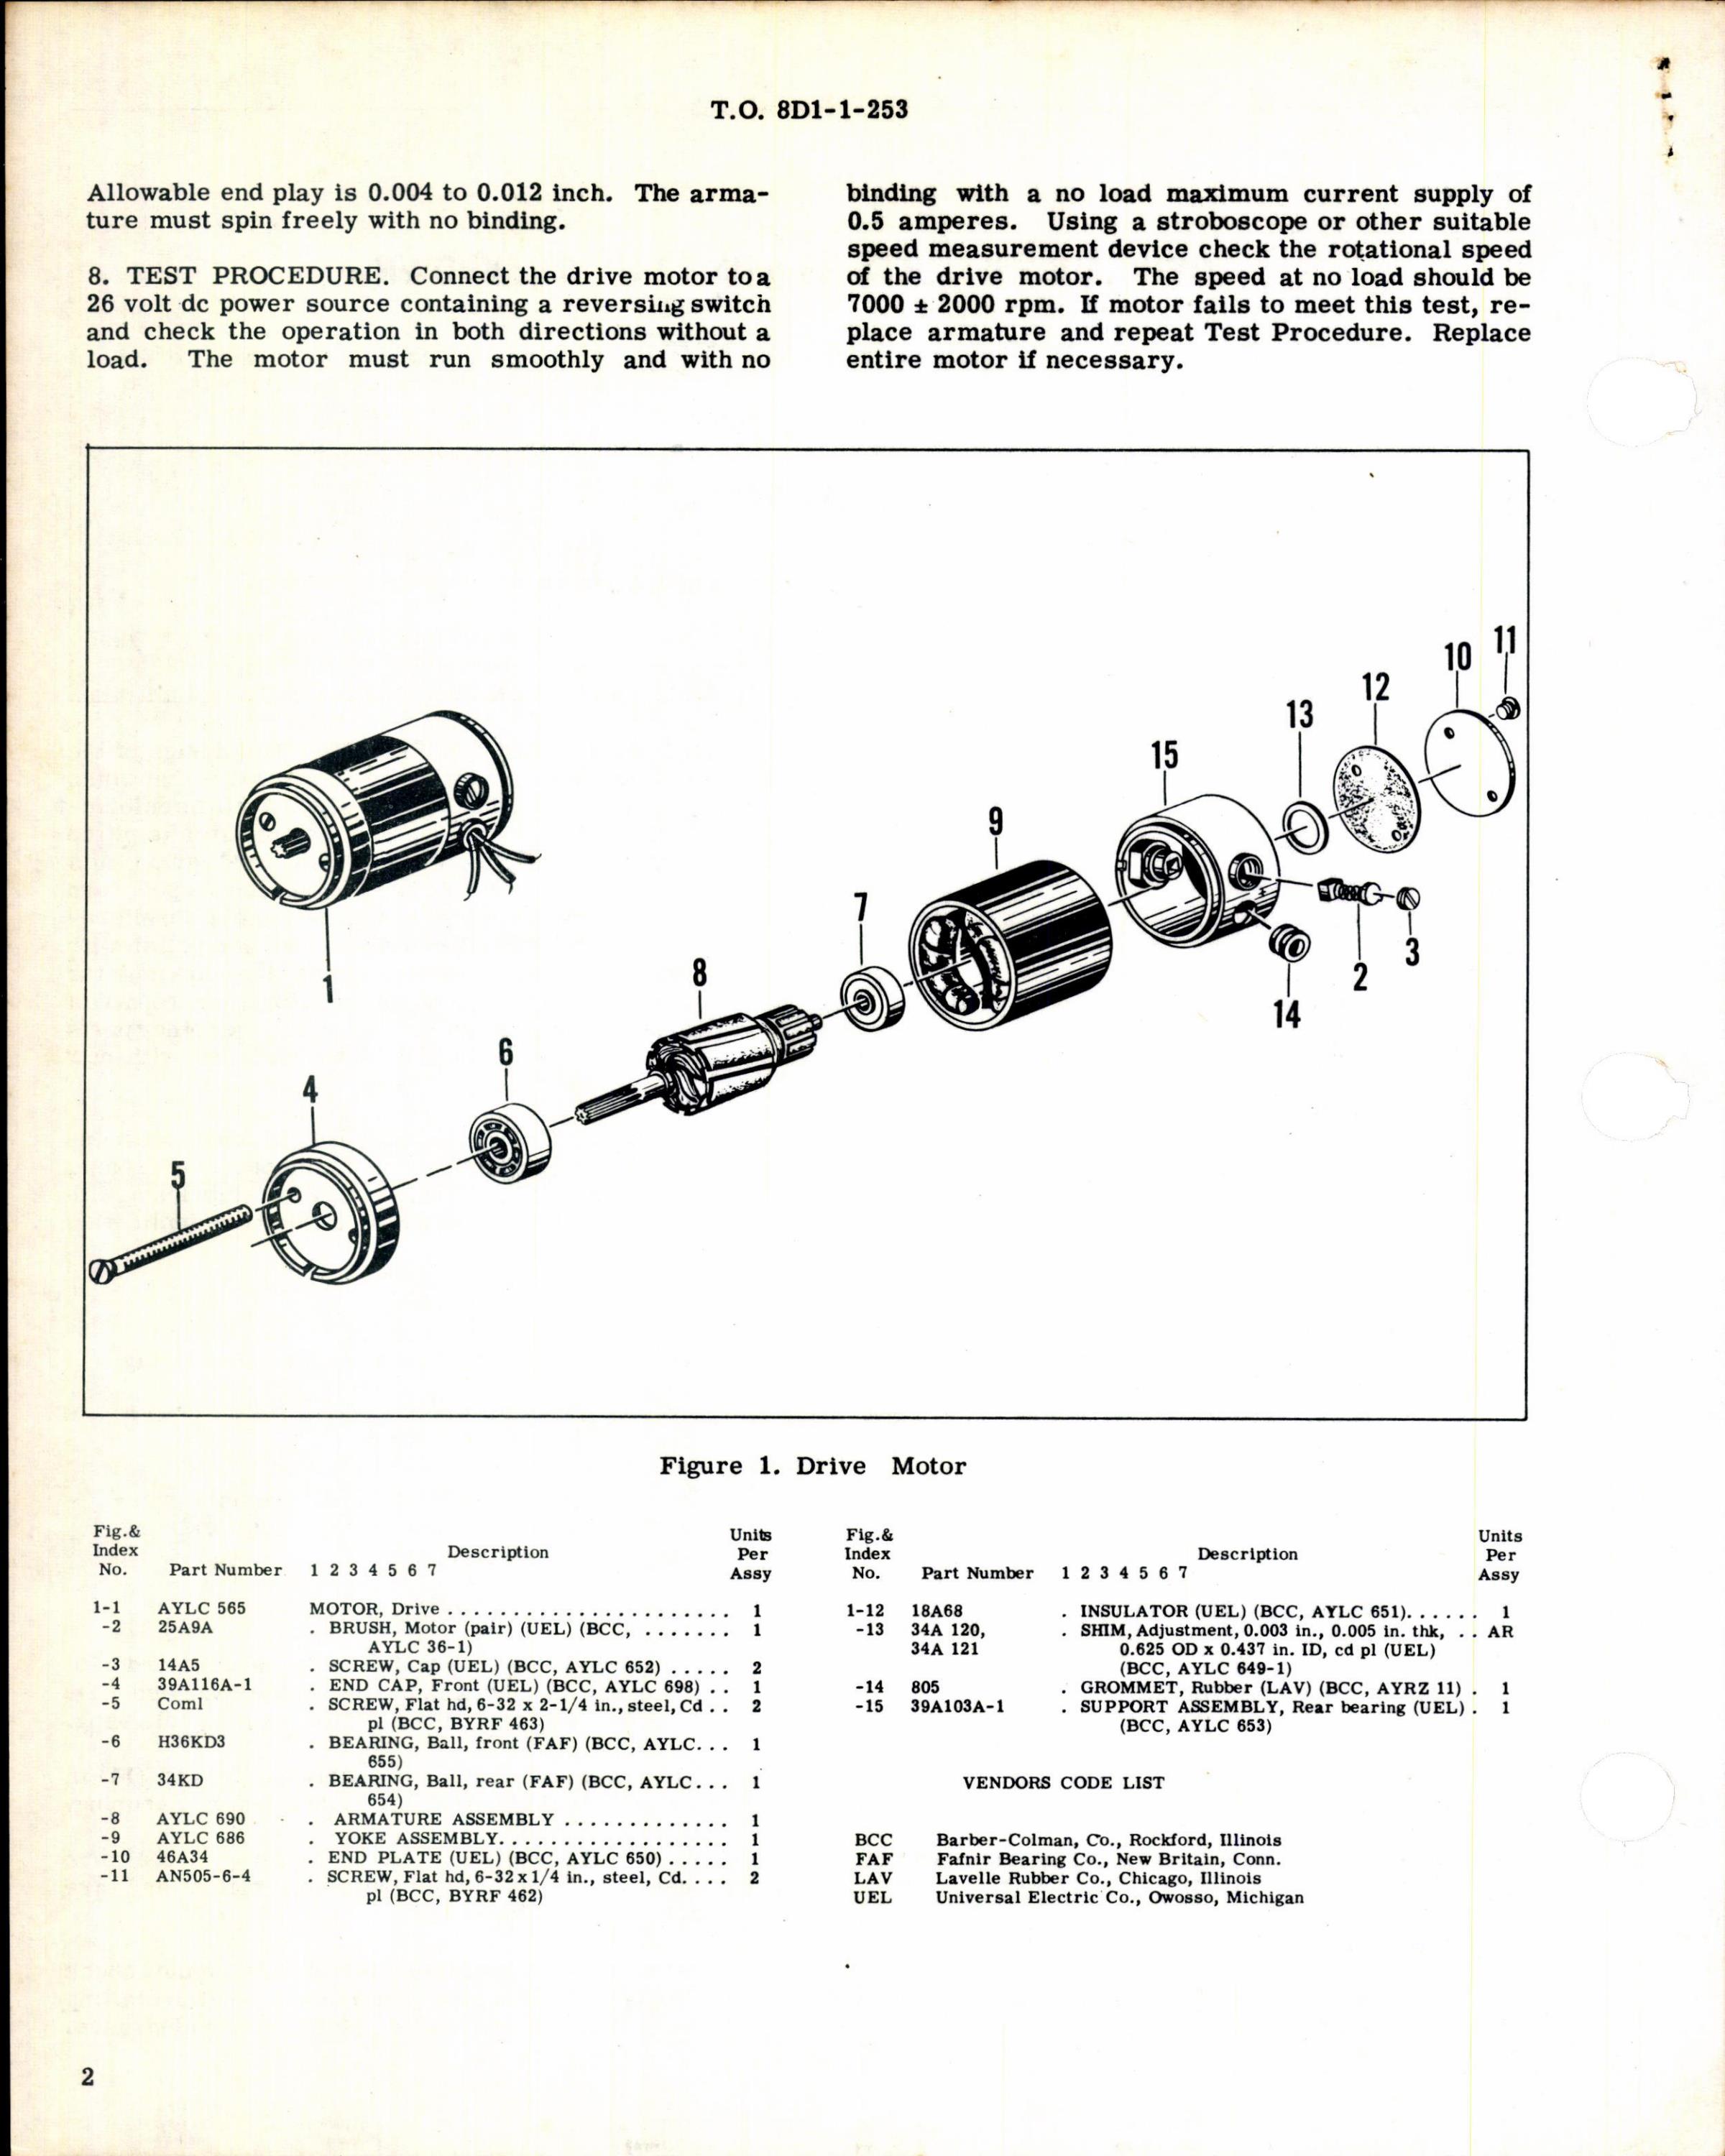 Sample page 2 from AirCorps Library document: Overhaul Instructions with Parts Breakdown for Drive Motor AYLC 565